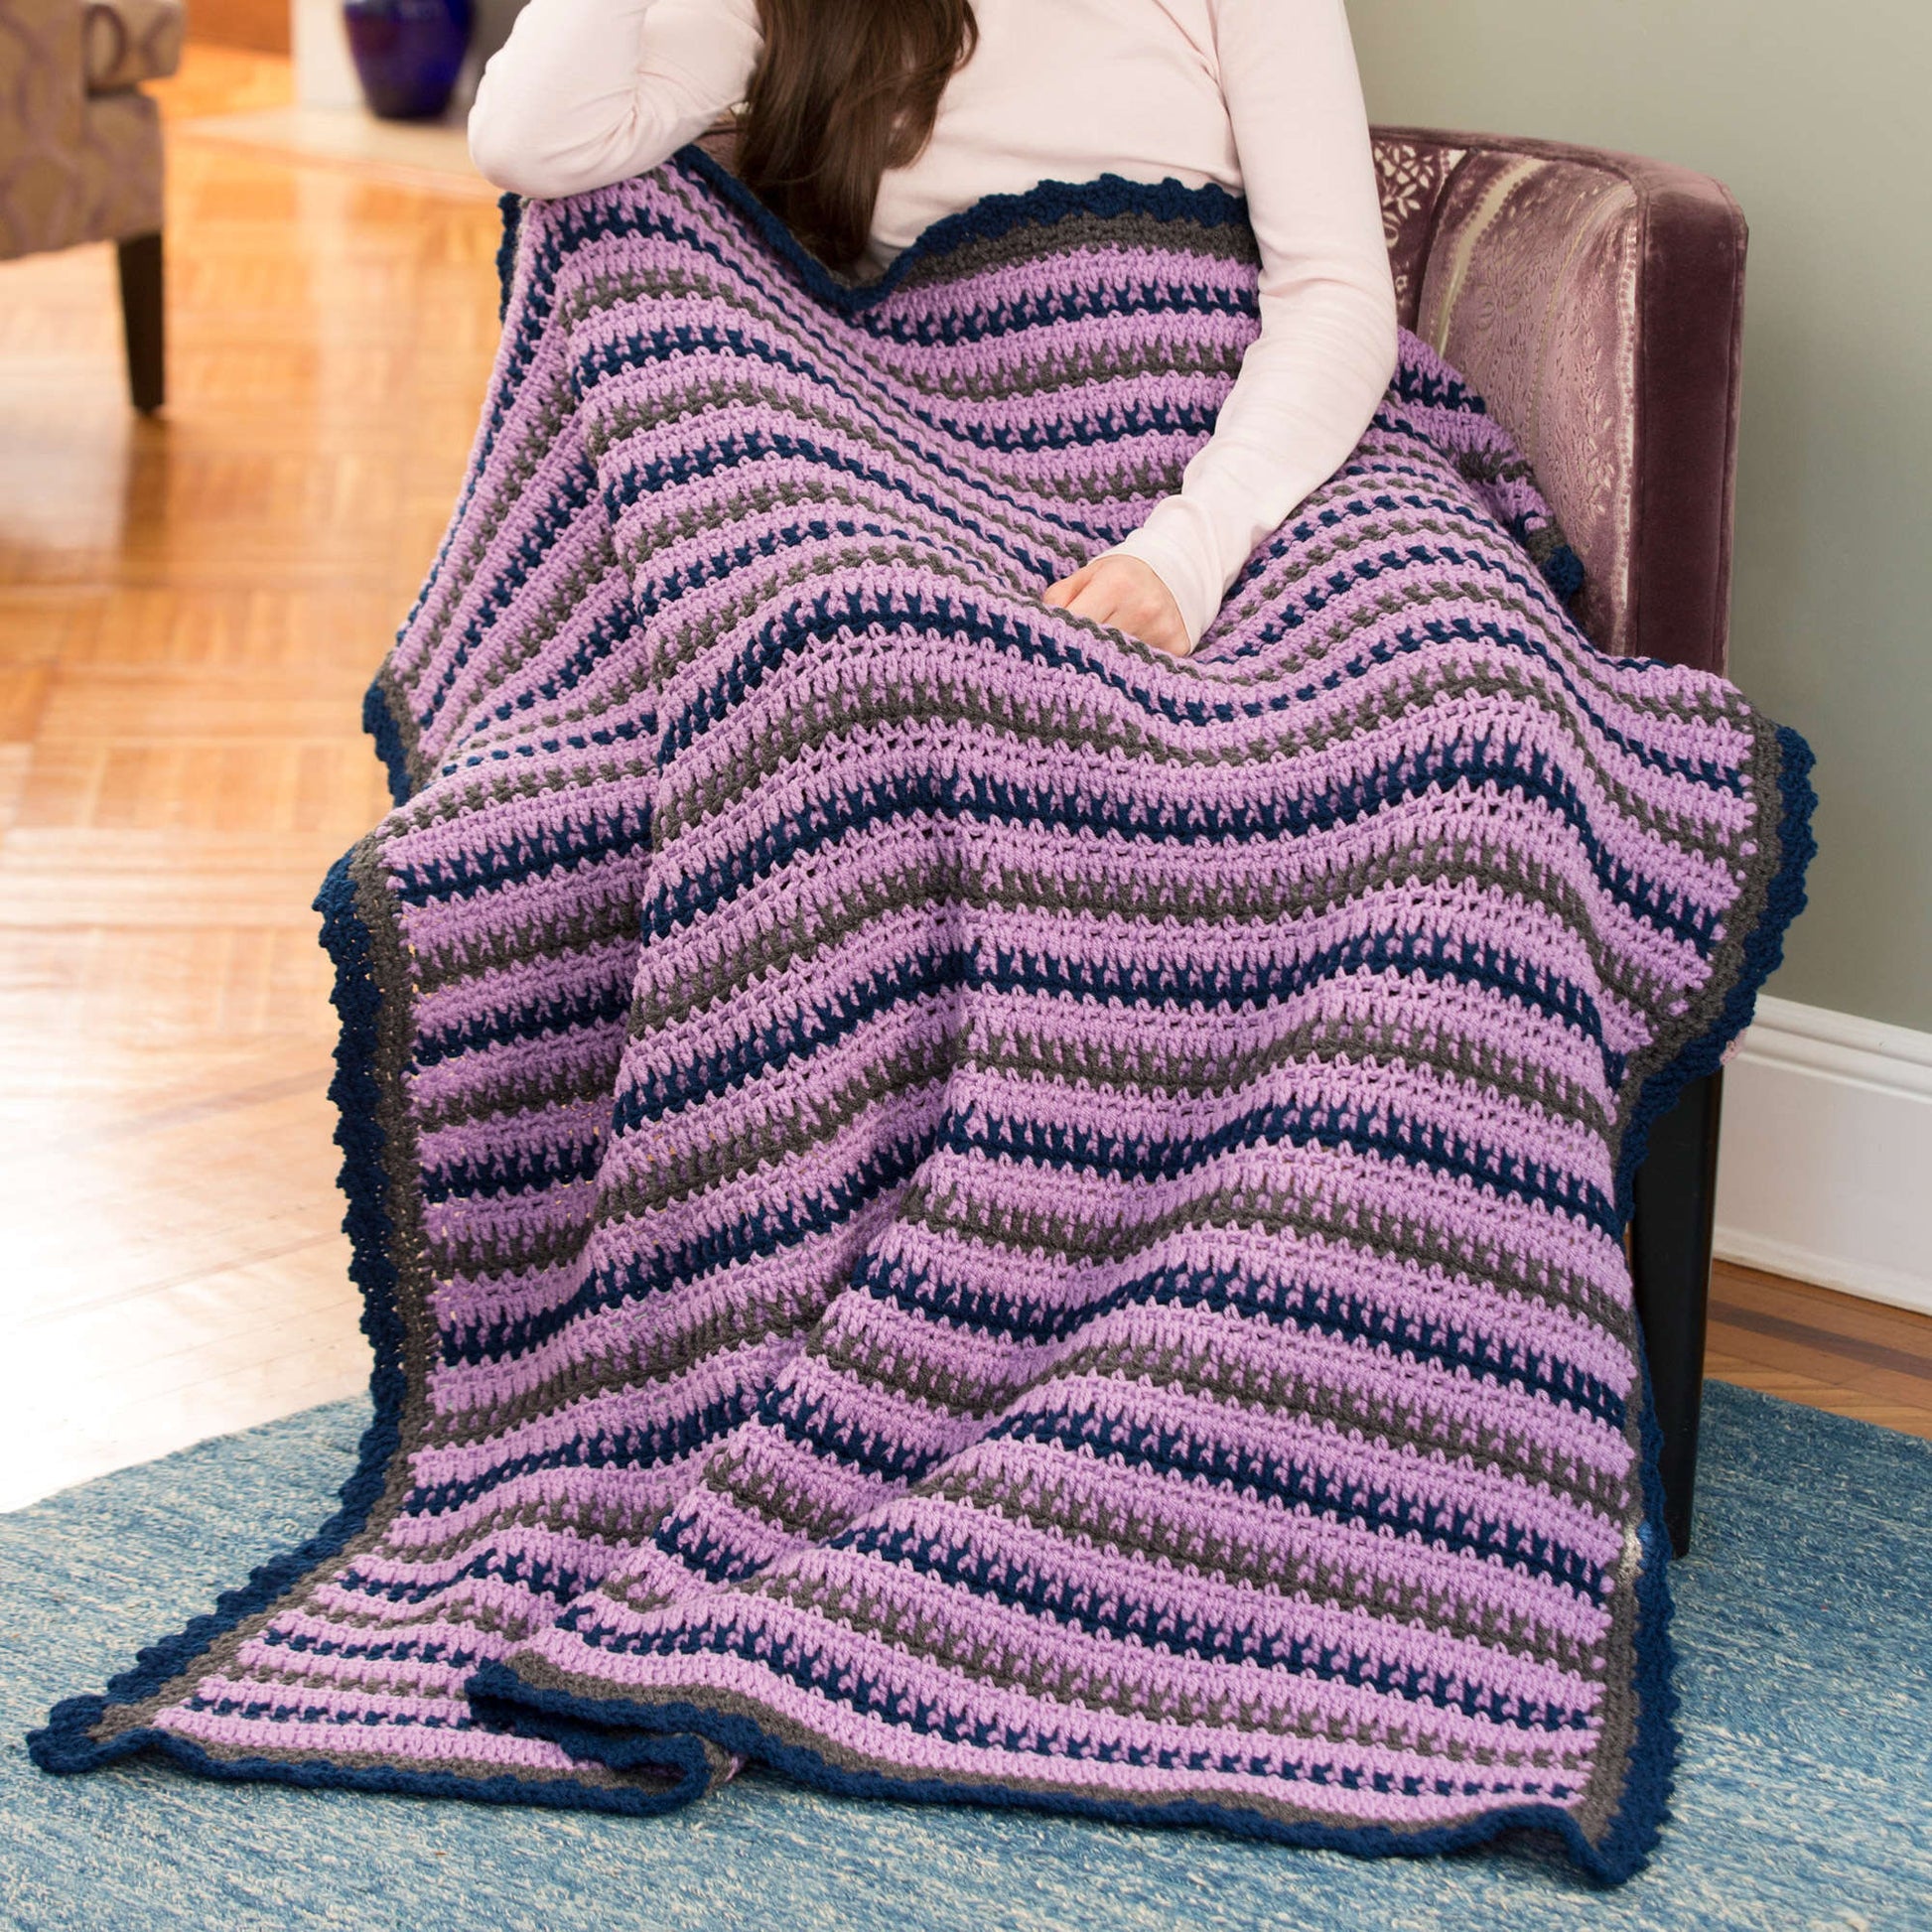 Free Red Heart Crochet Cozy Home Throw Pattern